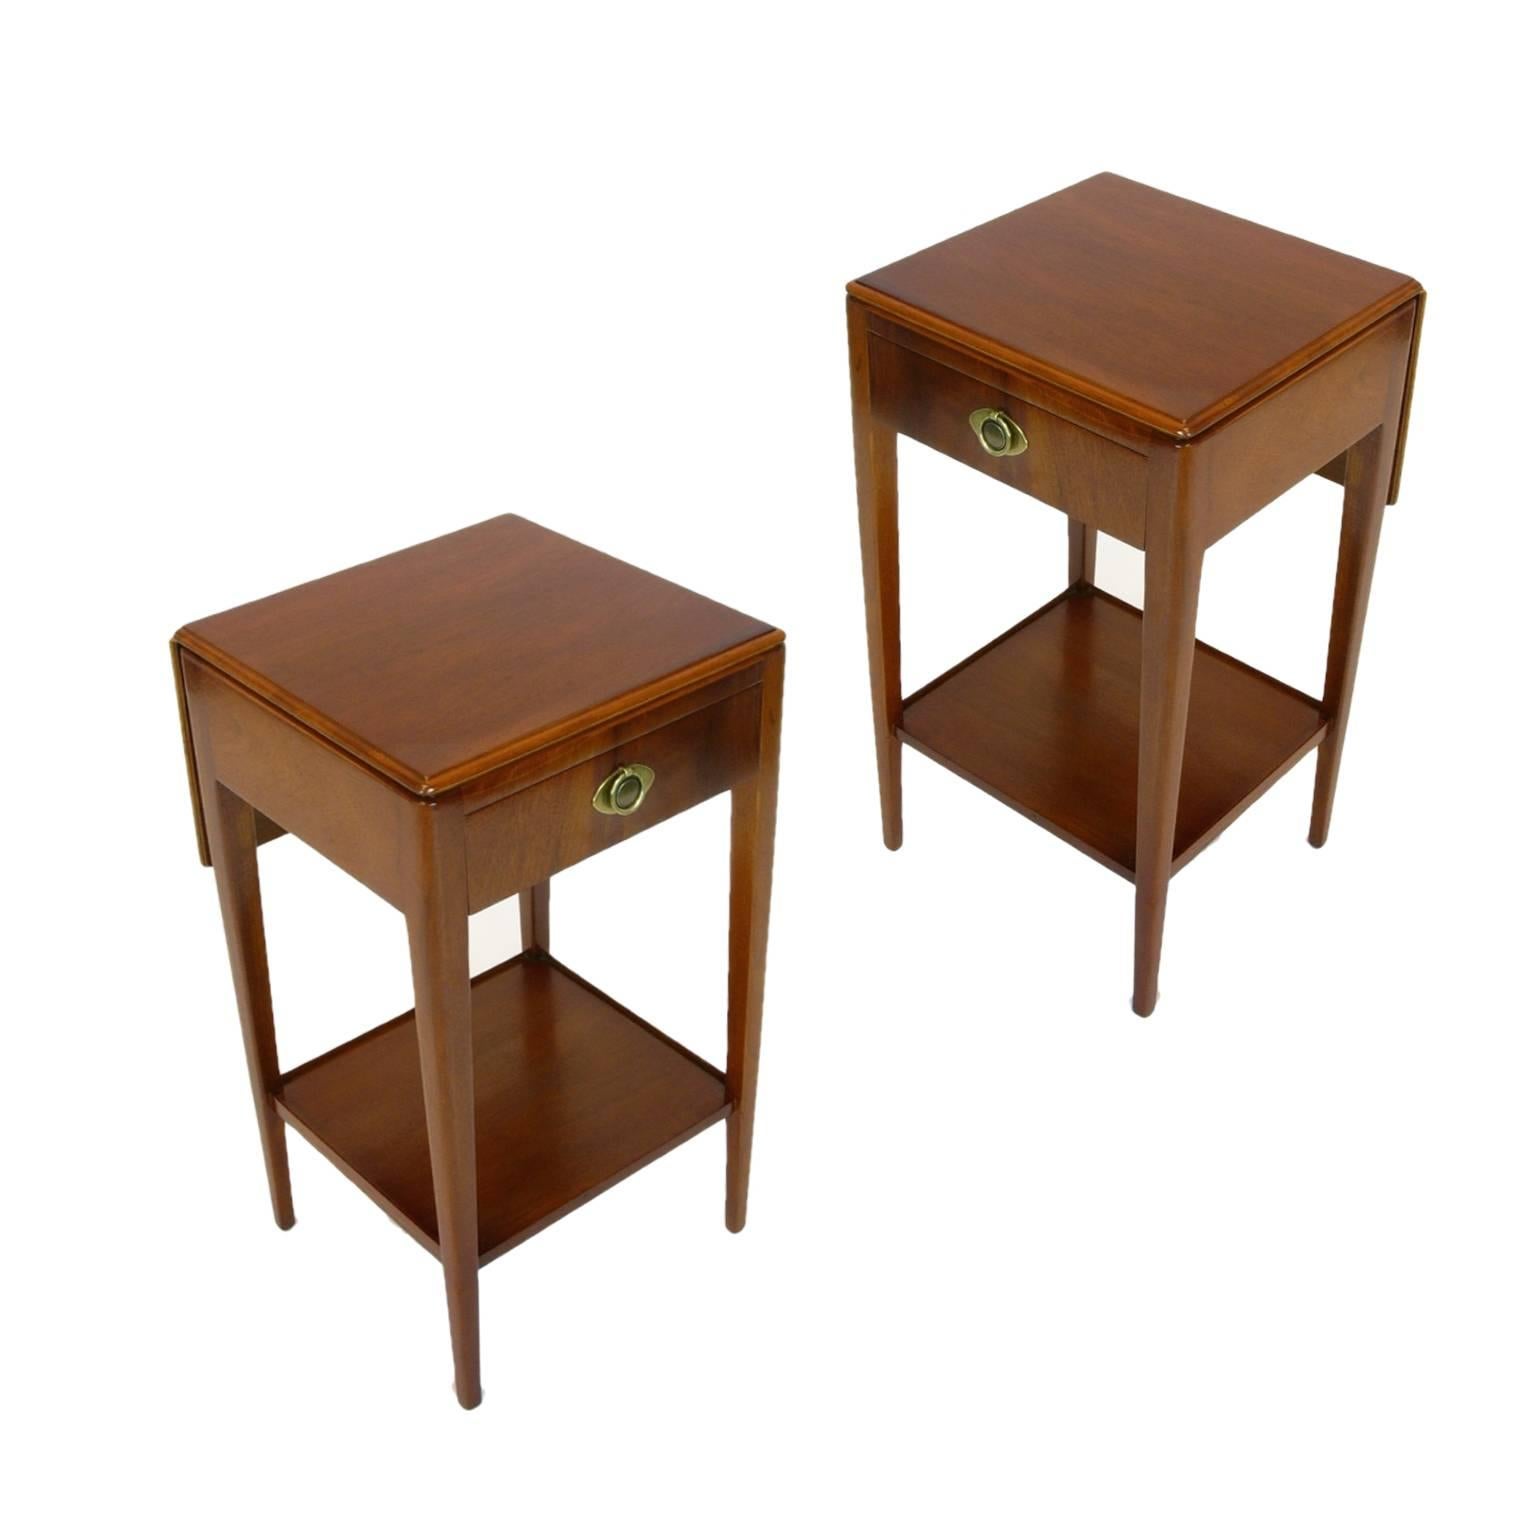 Art Deco Pair of Nightstands or Bedside Tables by Johnson Furniture